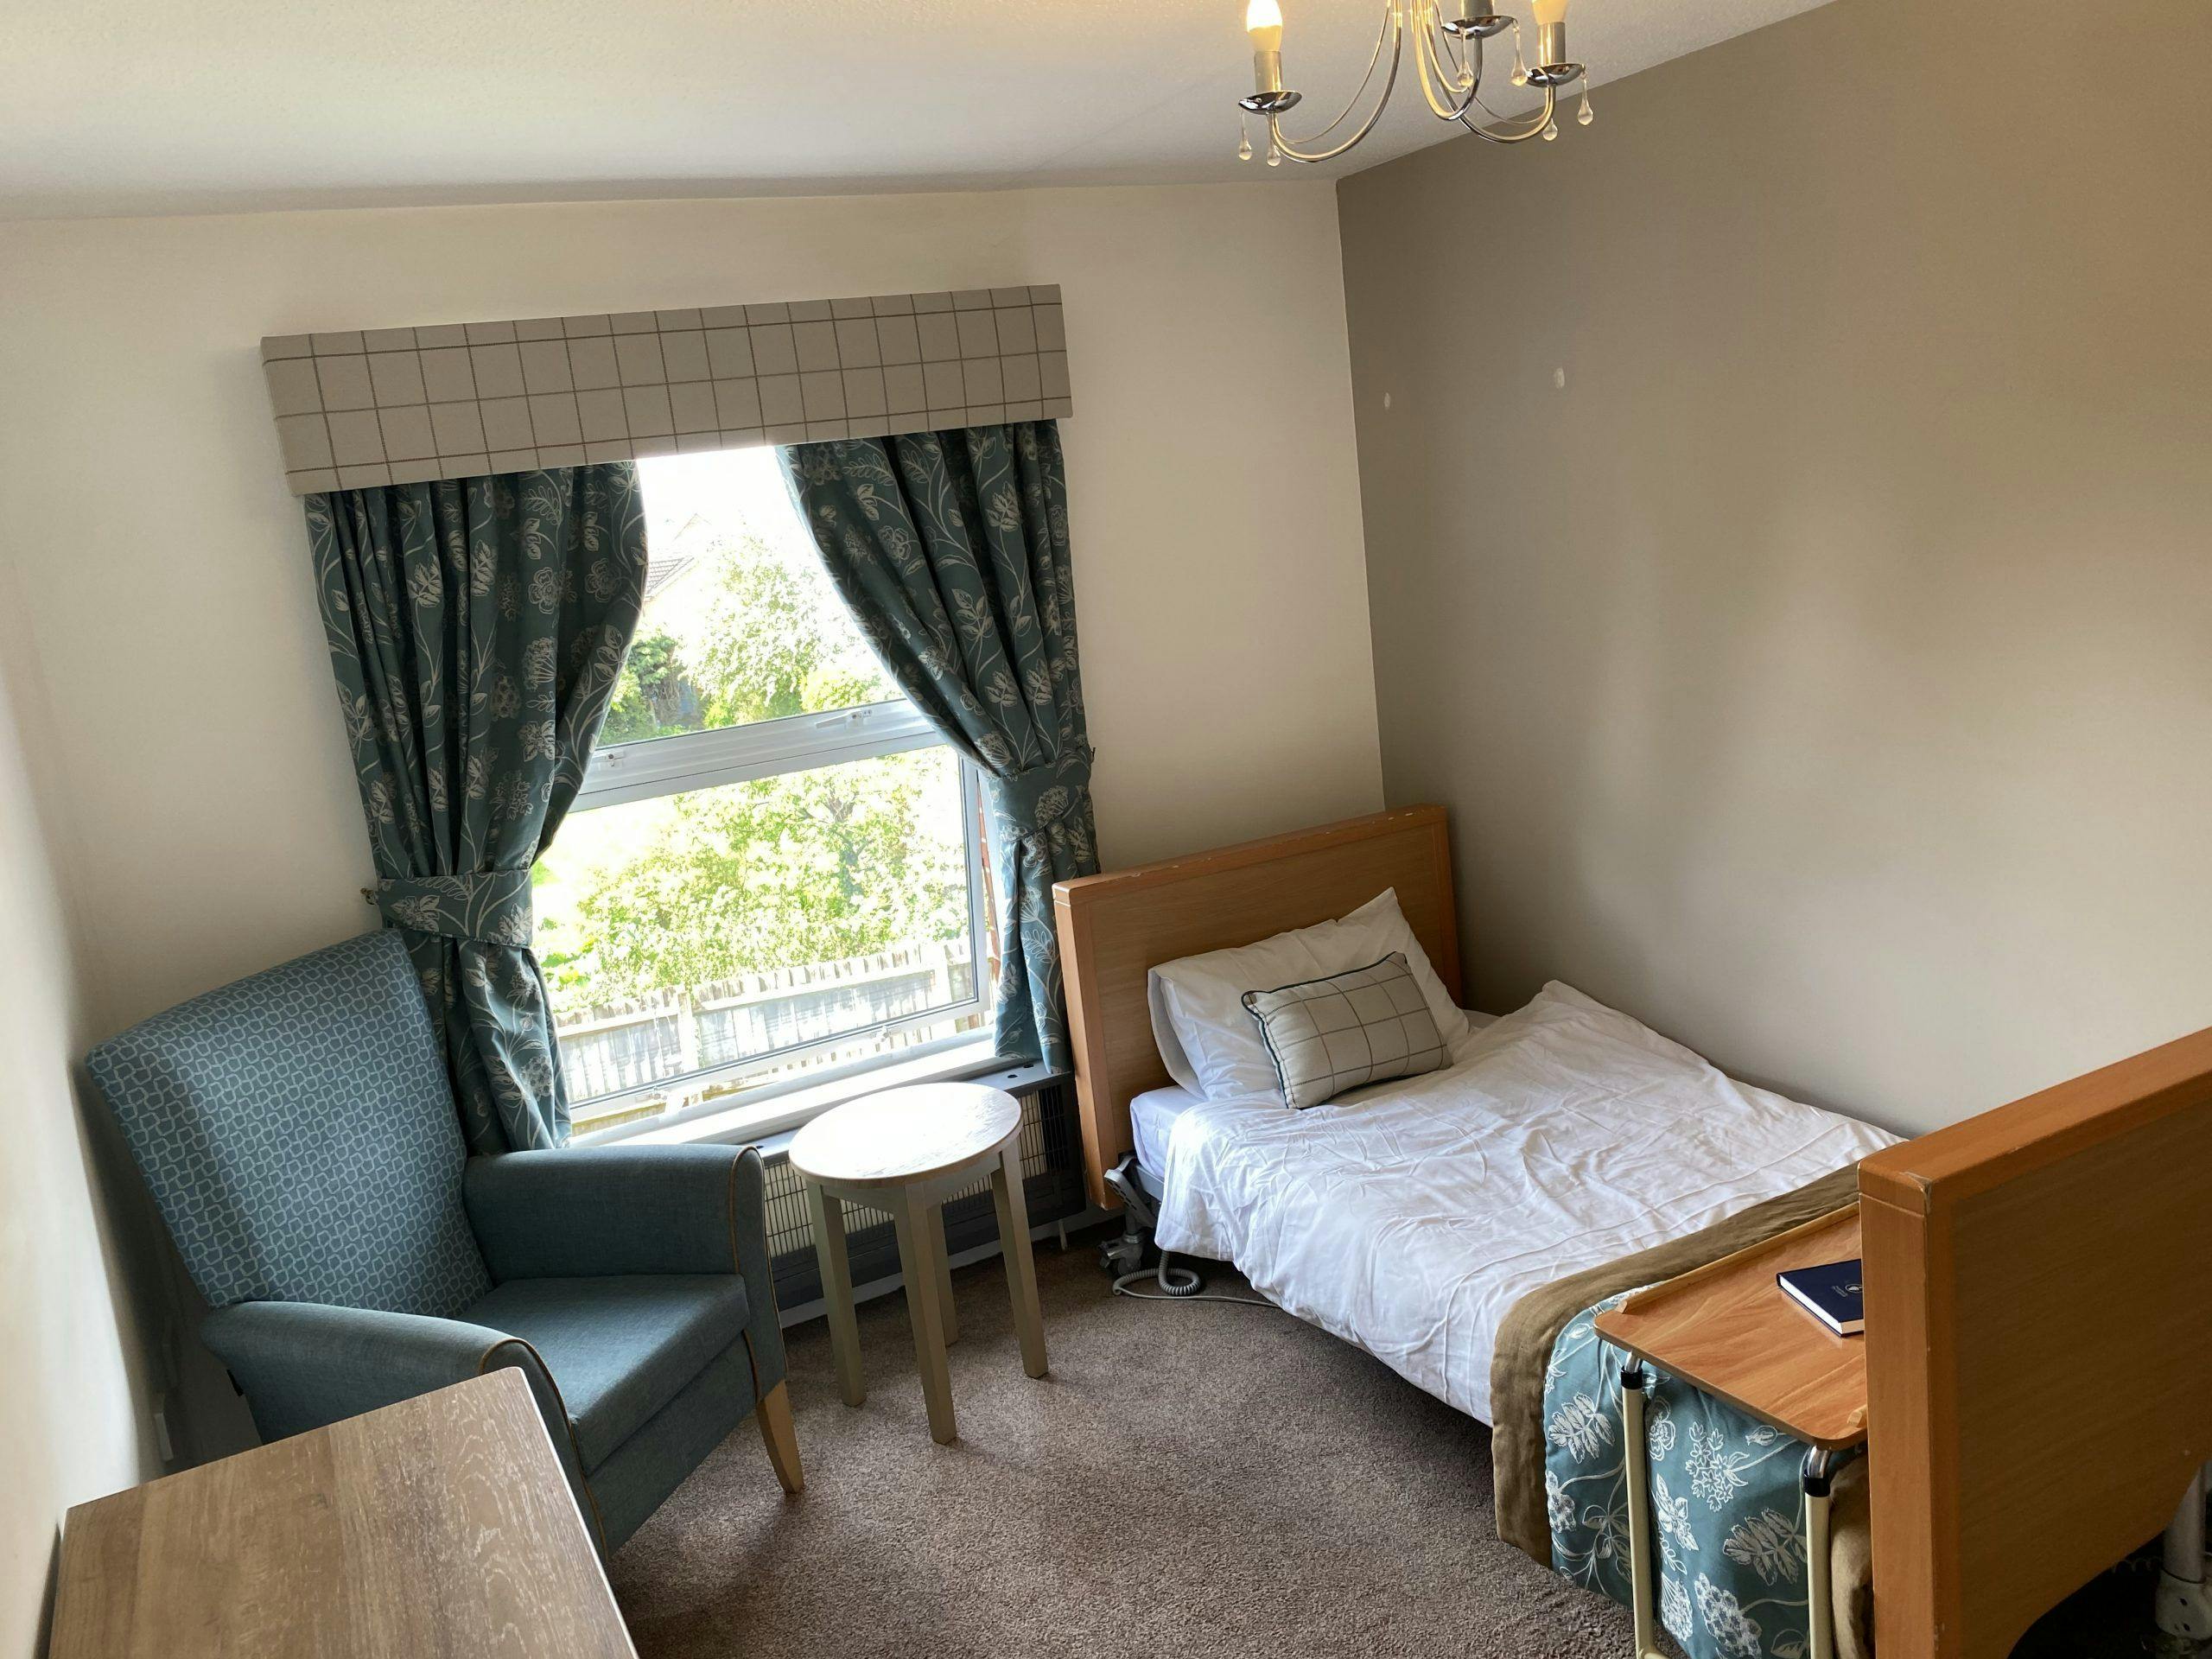 Bedroom of Holmer care home in Holmer, Hereford